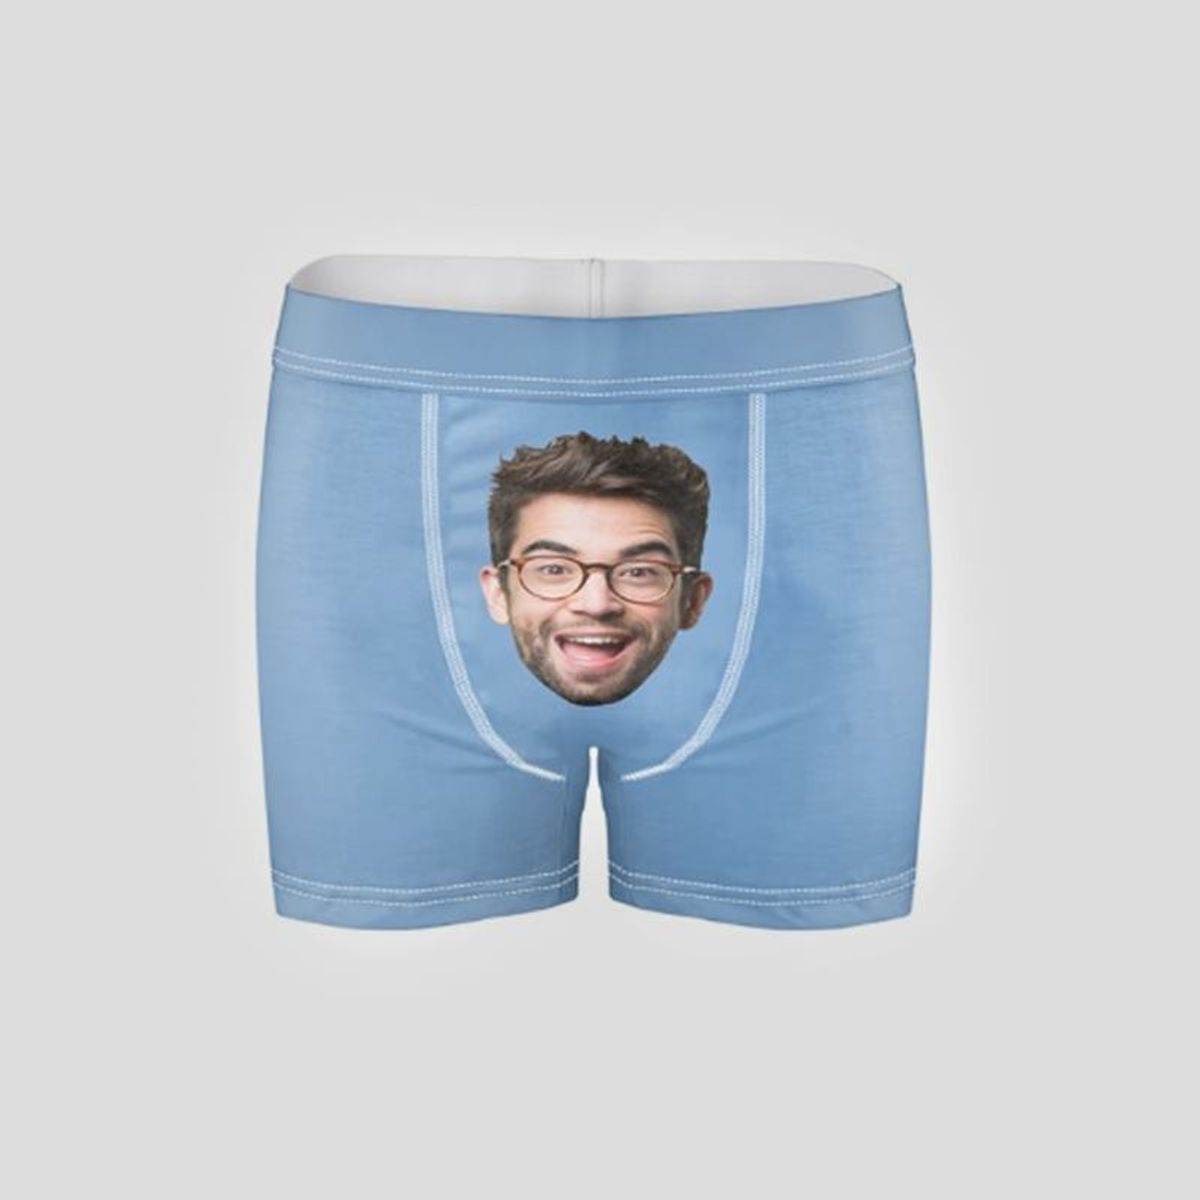 Woman gifts her boyfriend a pair of boxers with her face on it